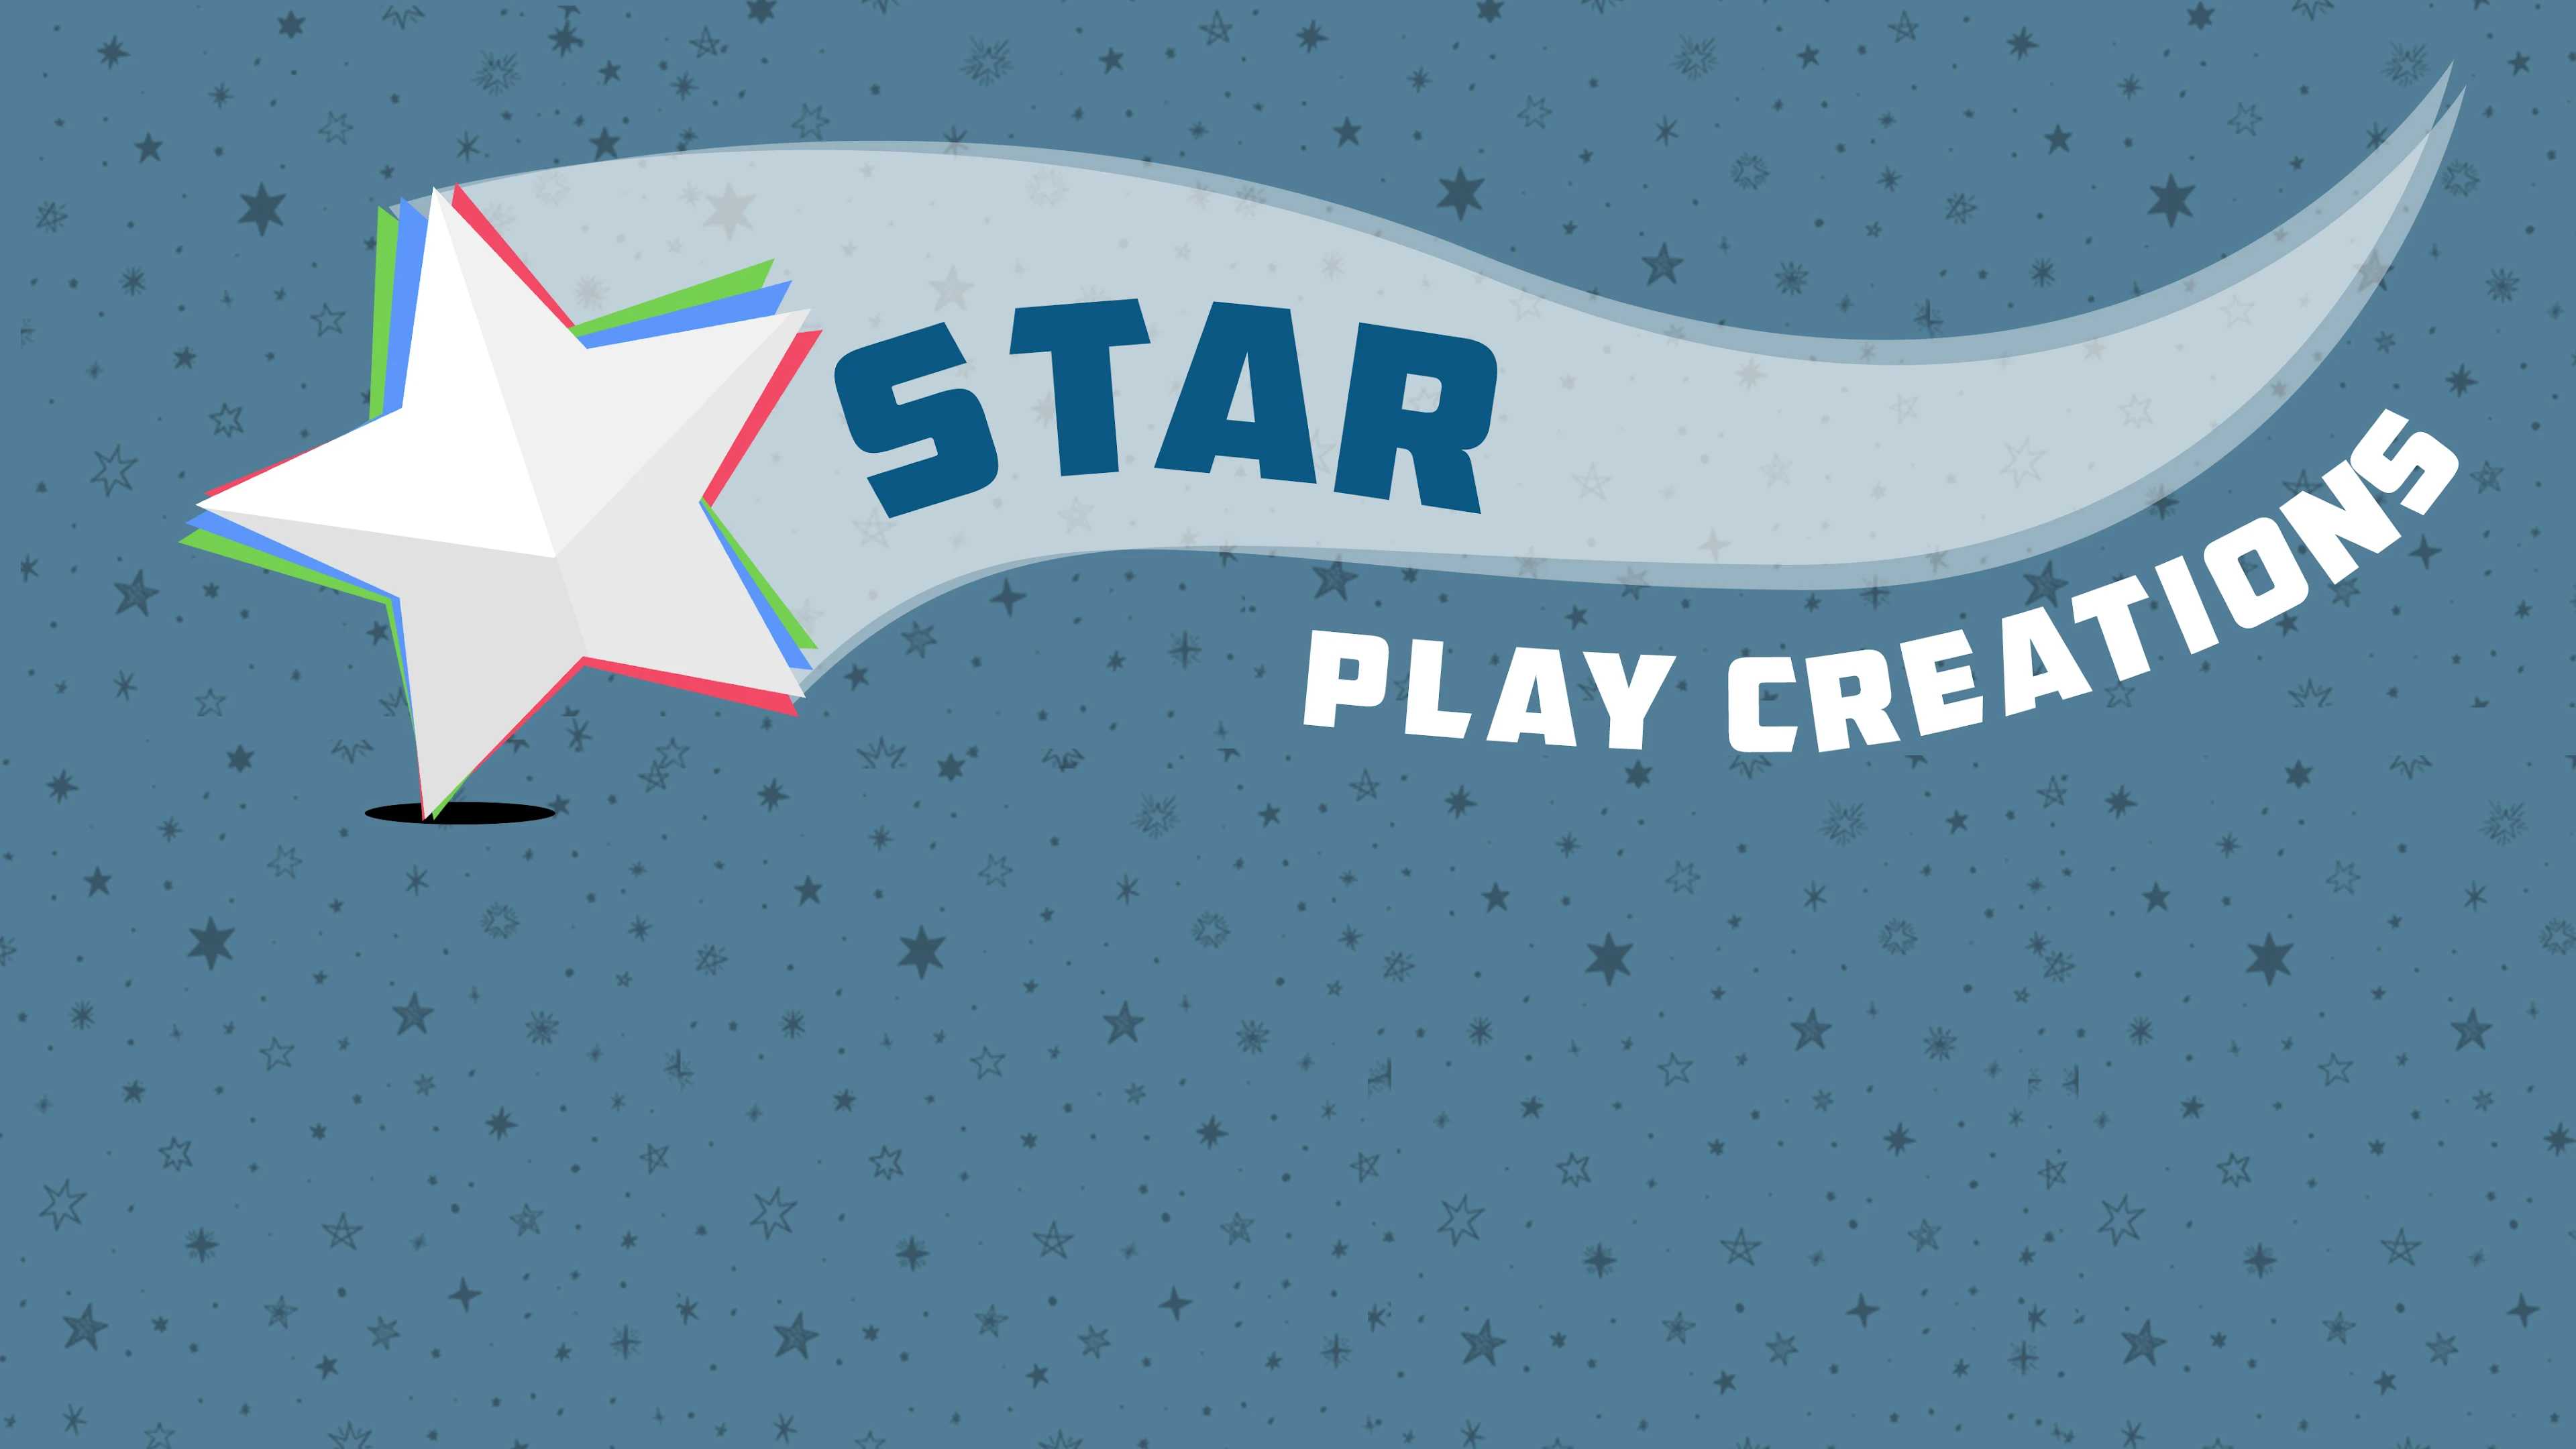 Android Apps by Star Play Creations on Google Play